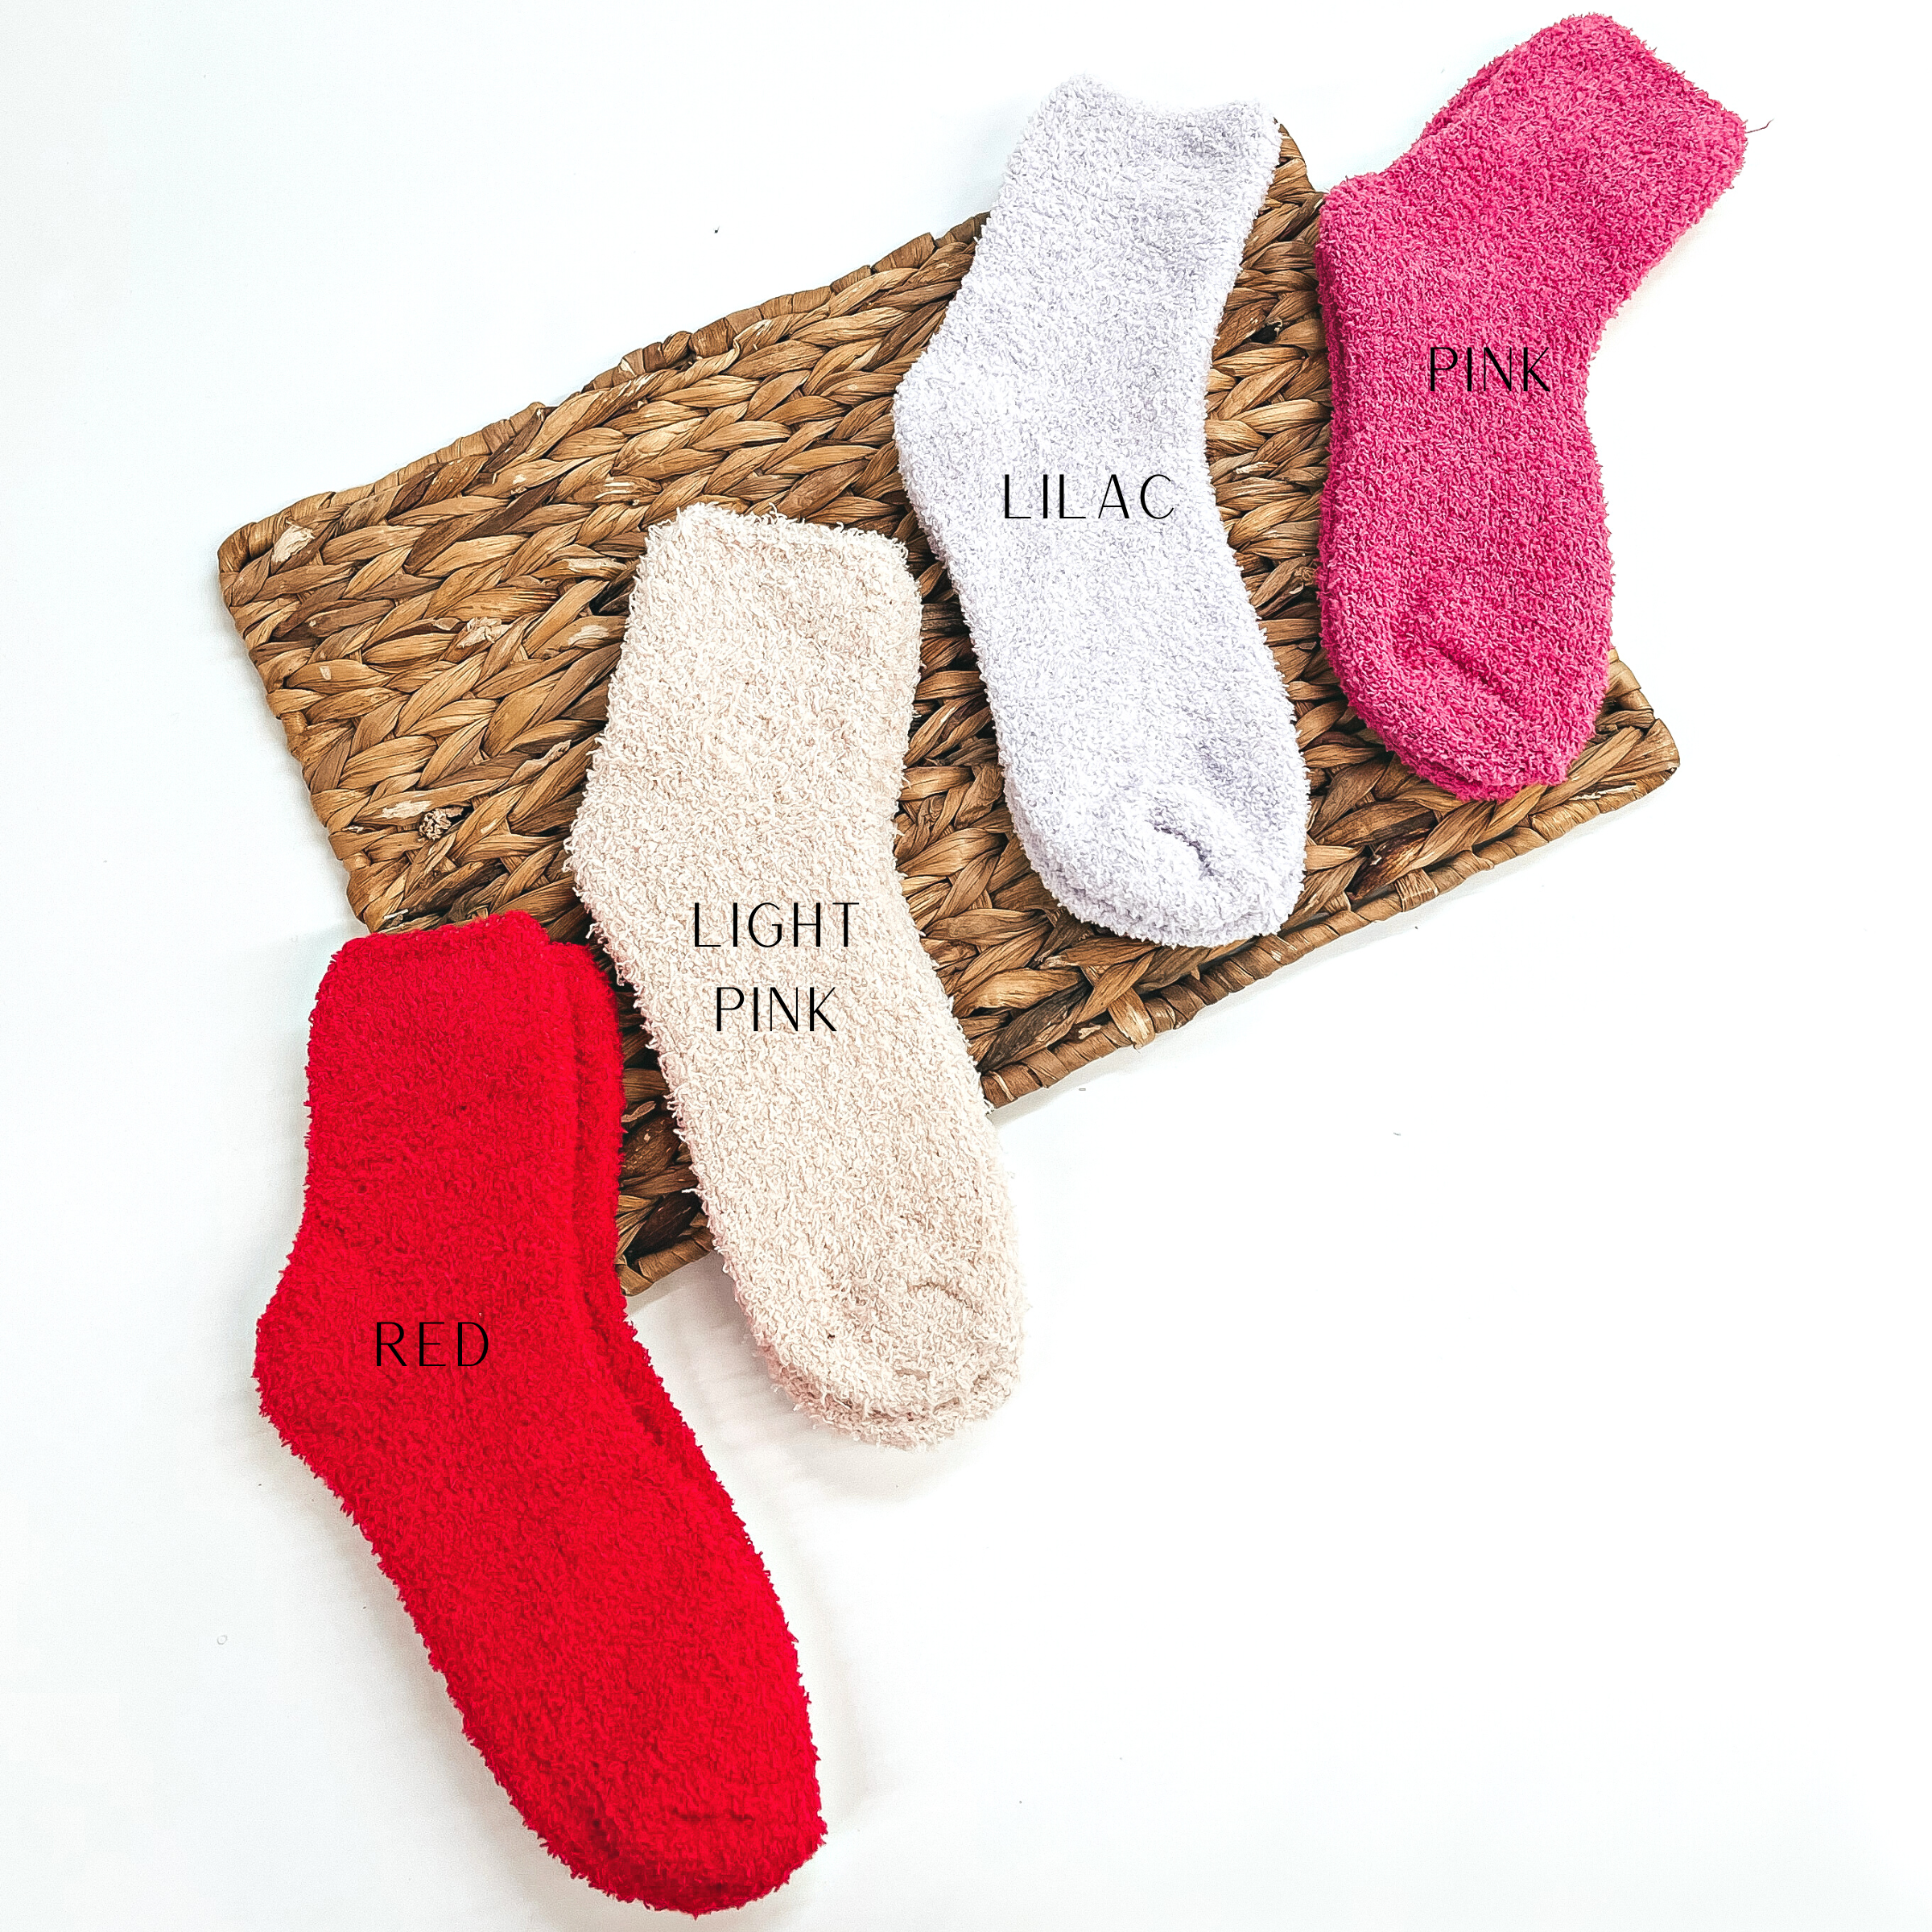 These are four pairs of fuzzy socks, from left to right; red, light pink, lilac,  and pink. These socks are taken on a brown woven slate and on a white  background.